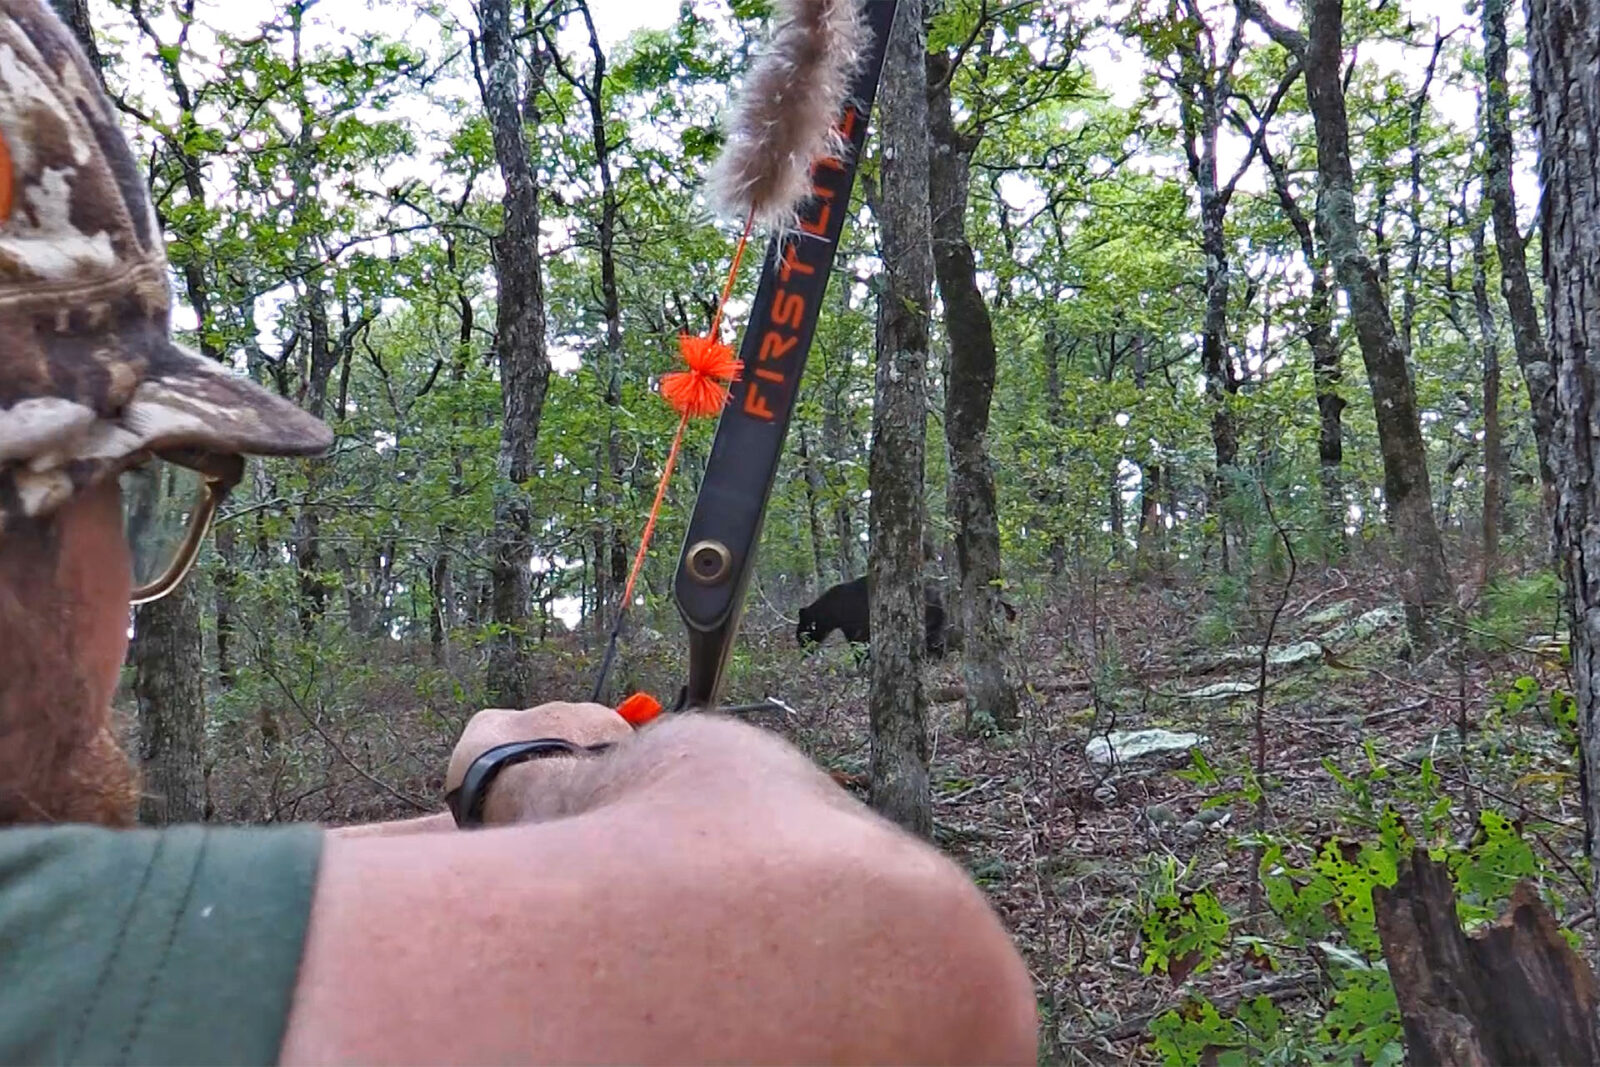 Using a Recurve bow to aim and hunt bear